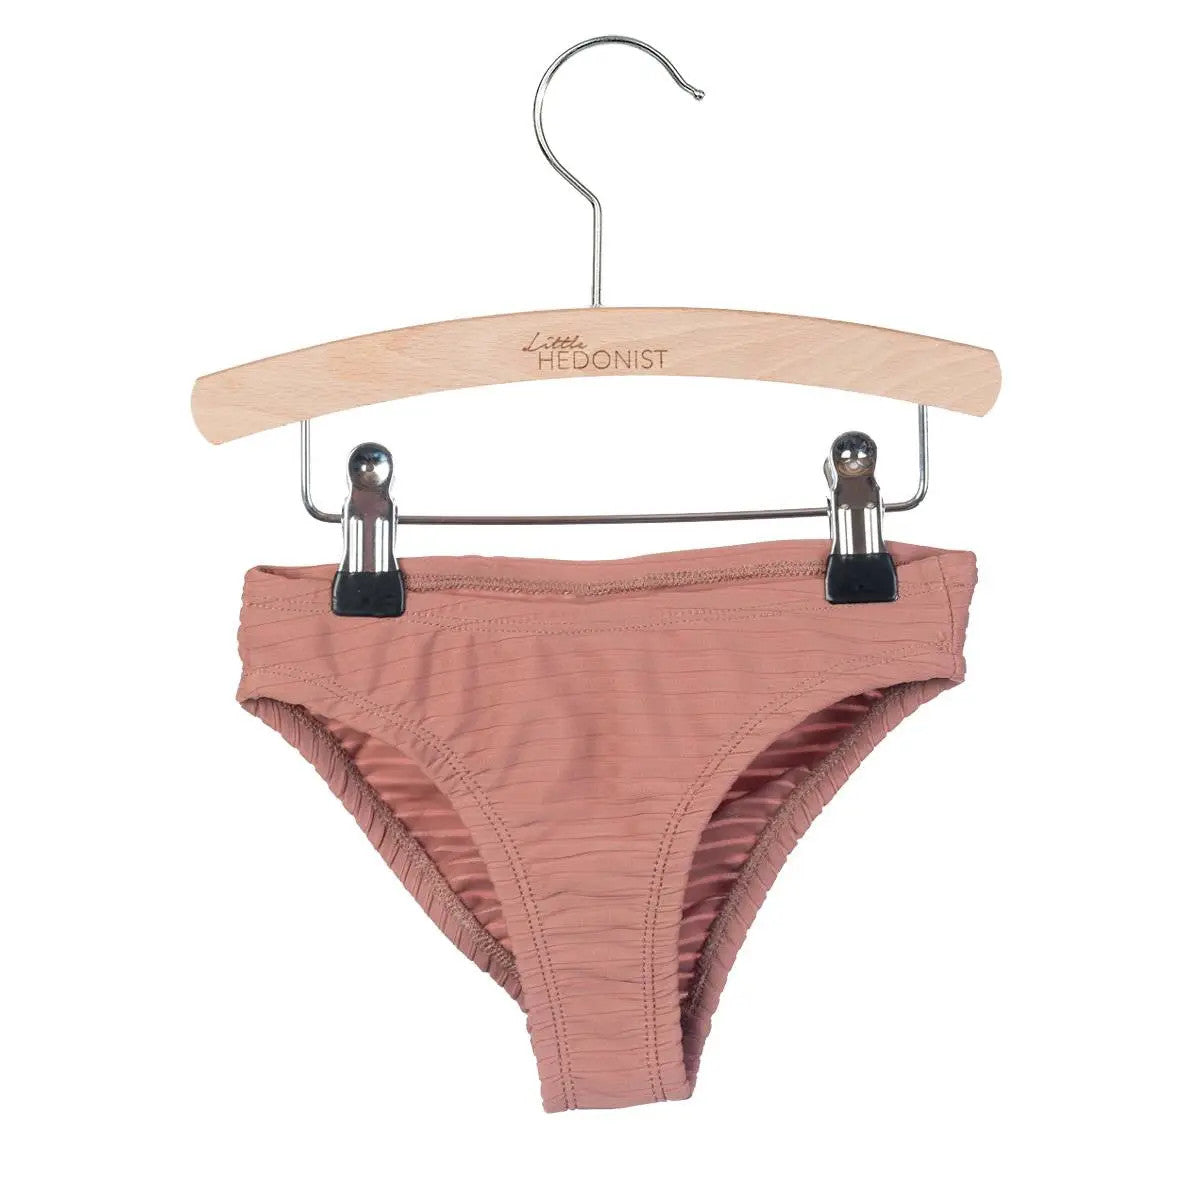 Little Hedonist kids bikini with adjustable straps, made of recycled polyamide, in Burlwood Pink